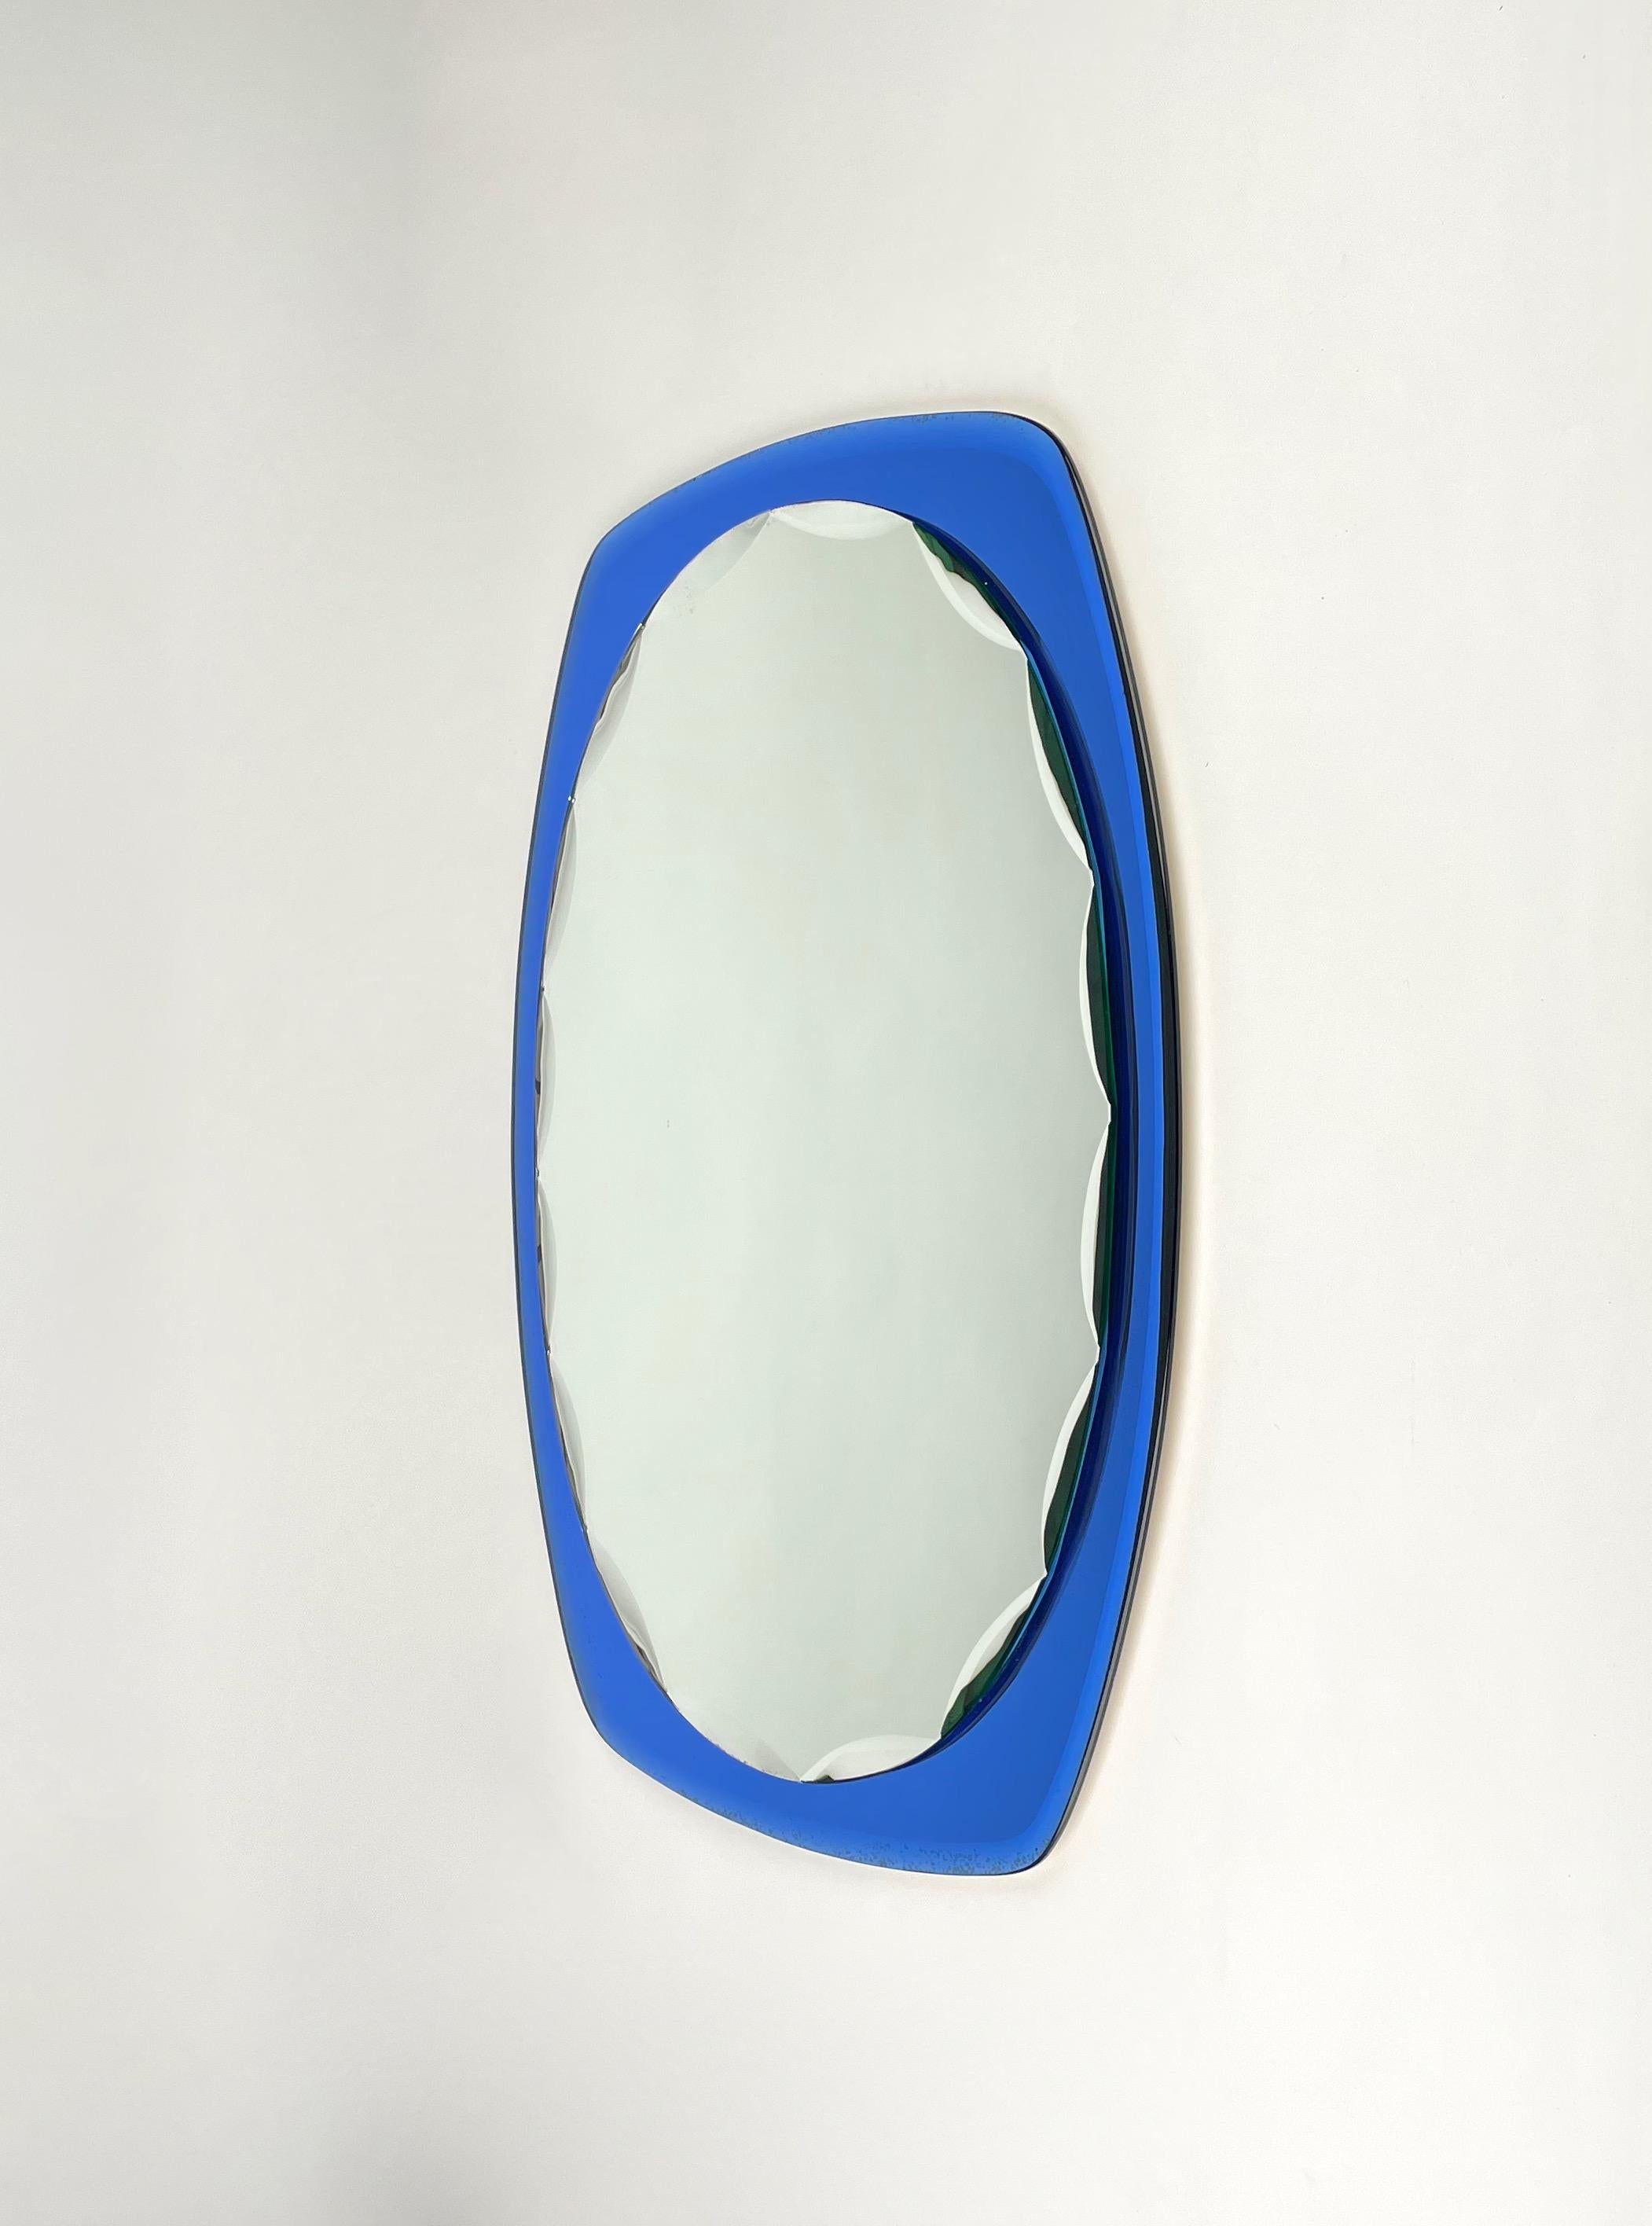 Mid-20th Century Midcentury Oval Wall Mirror Blue by Cristal Art, Italy, 1960s For Sale